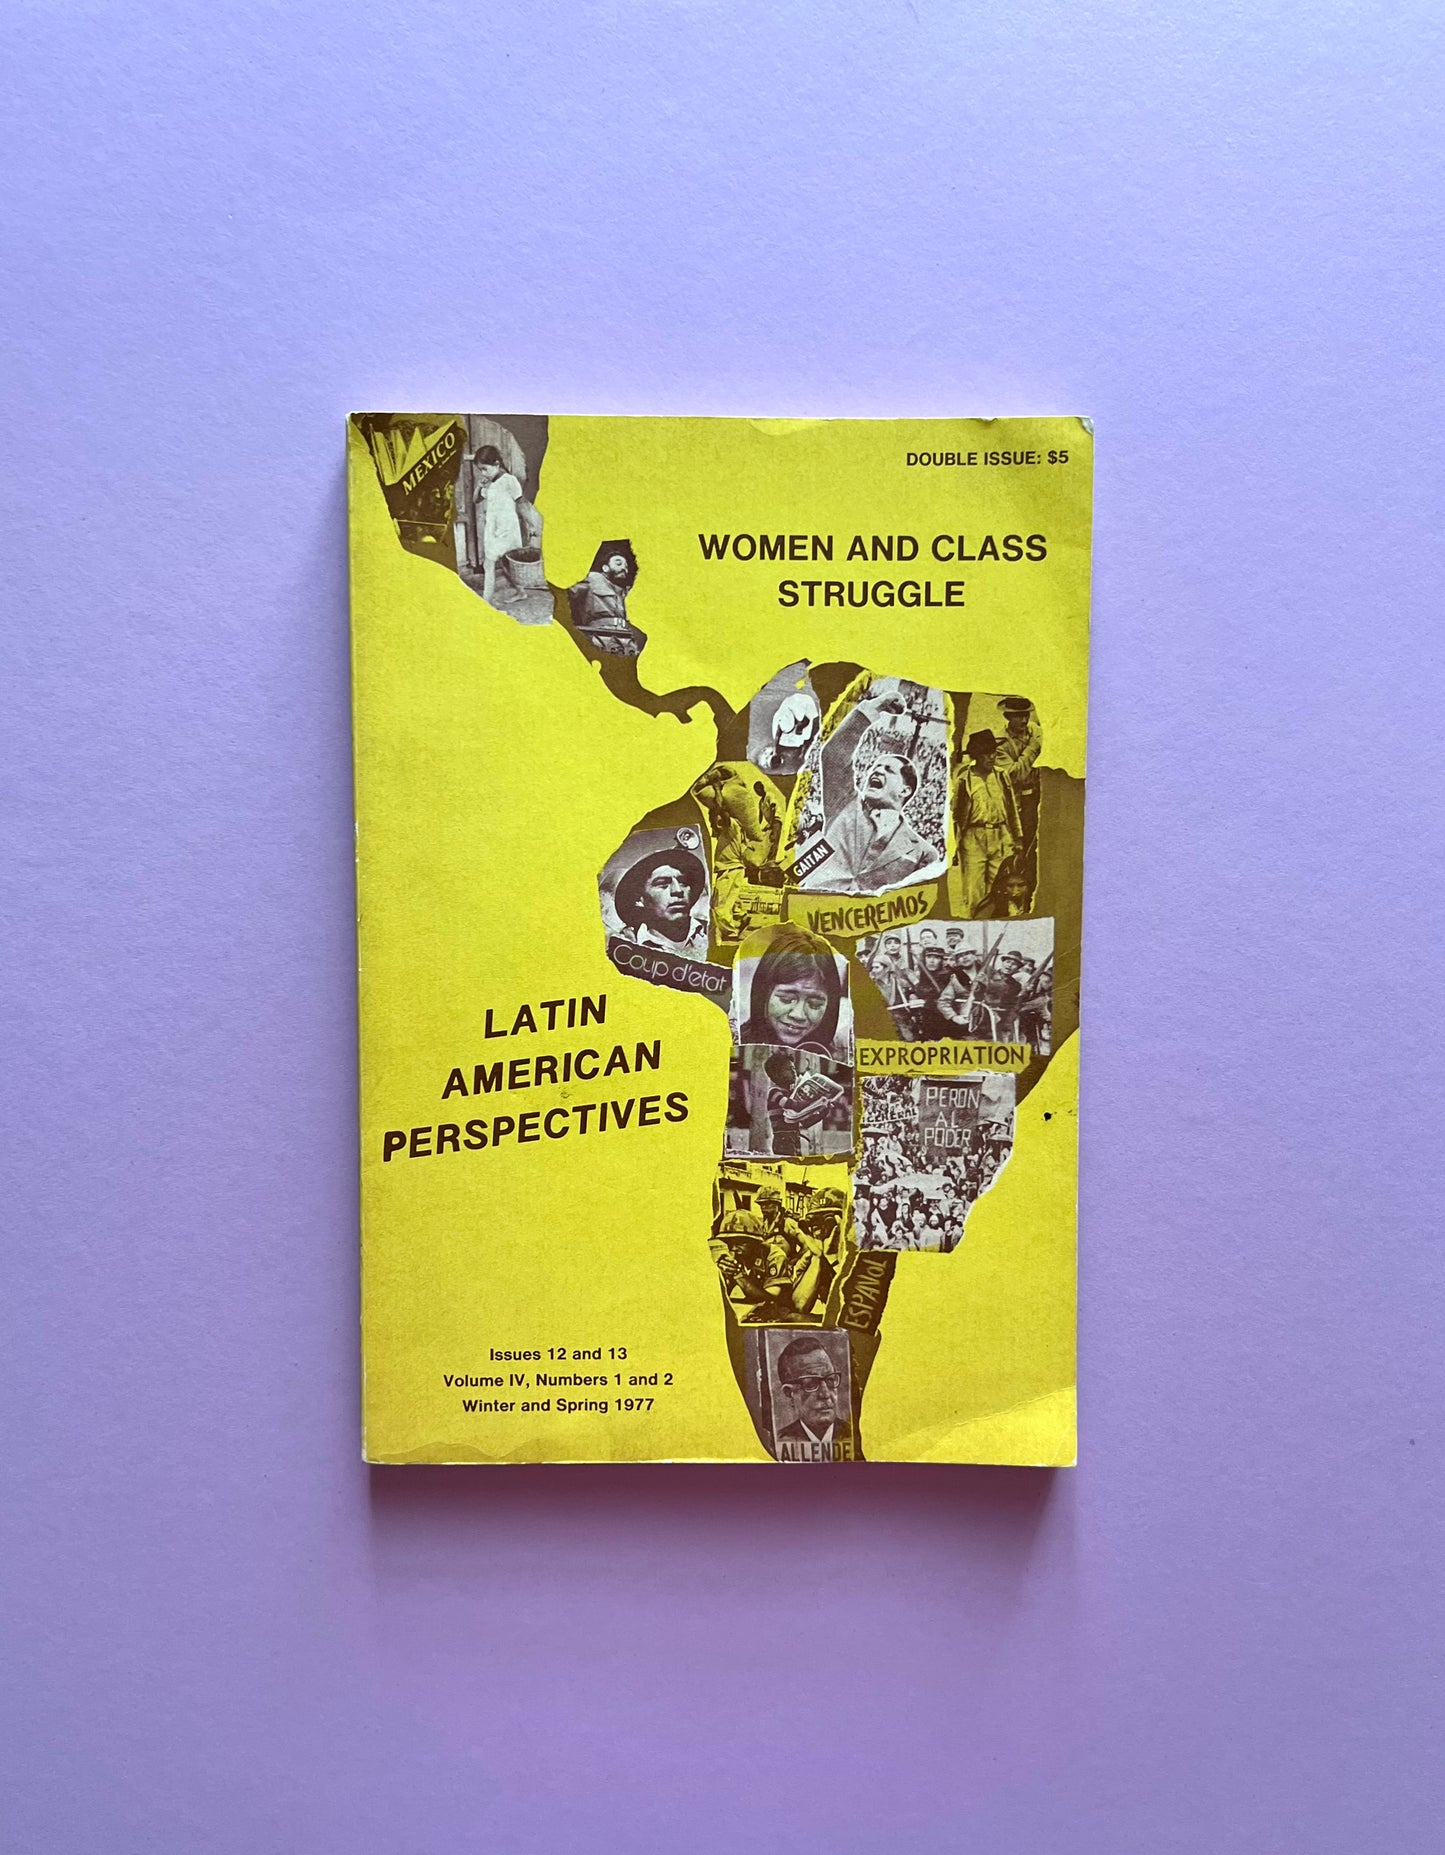 Latin American Perspectives: Women and Class Struggle / Winter and Spring 1977